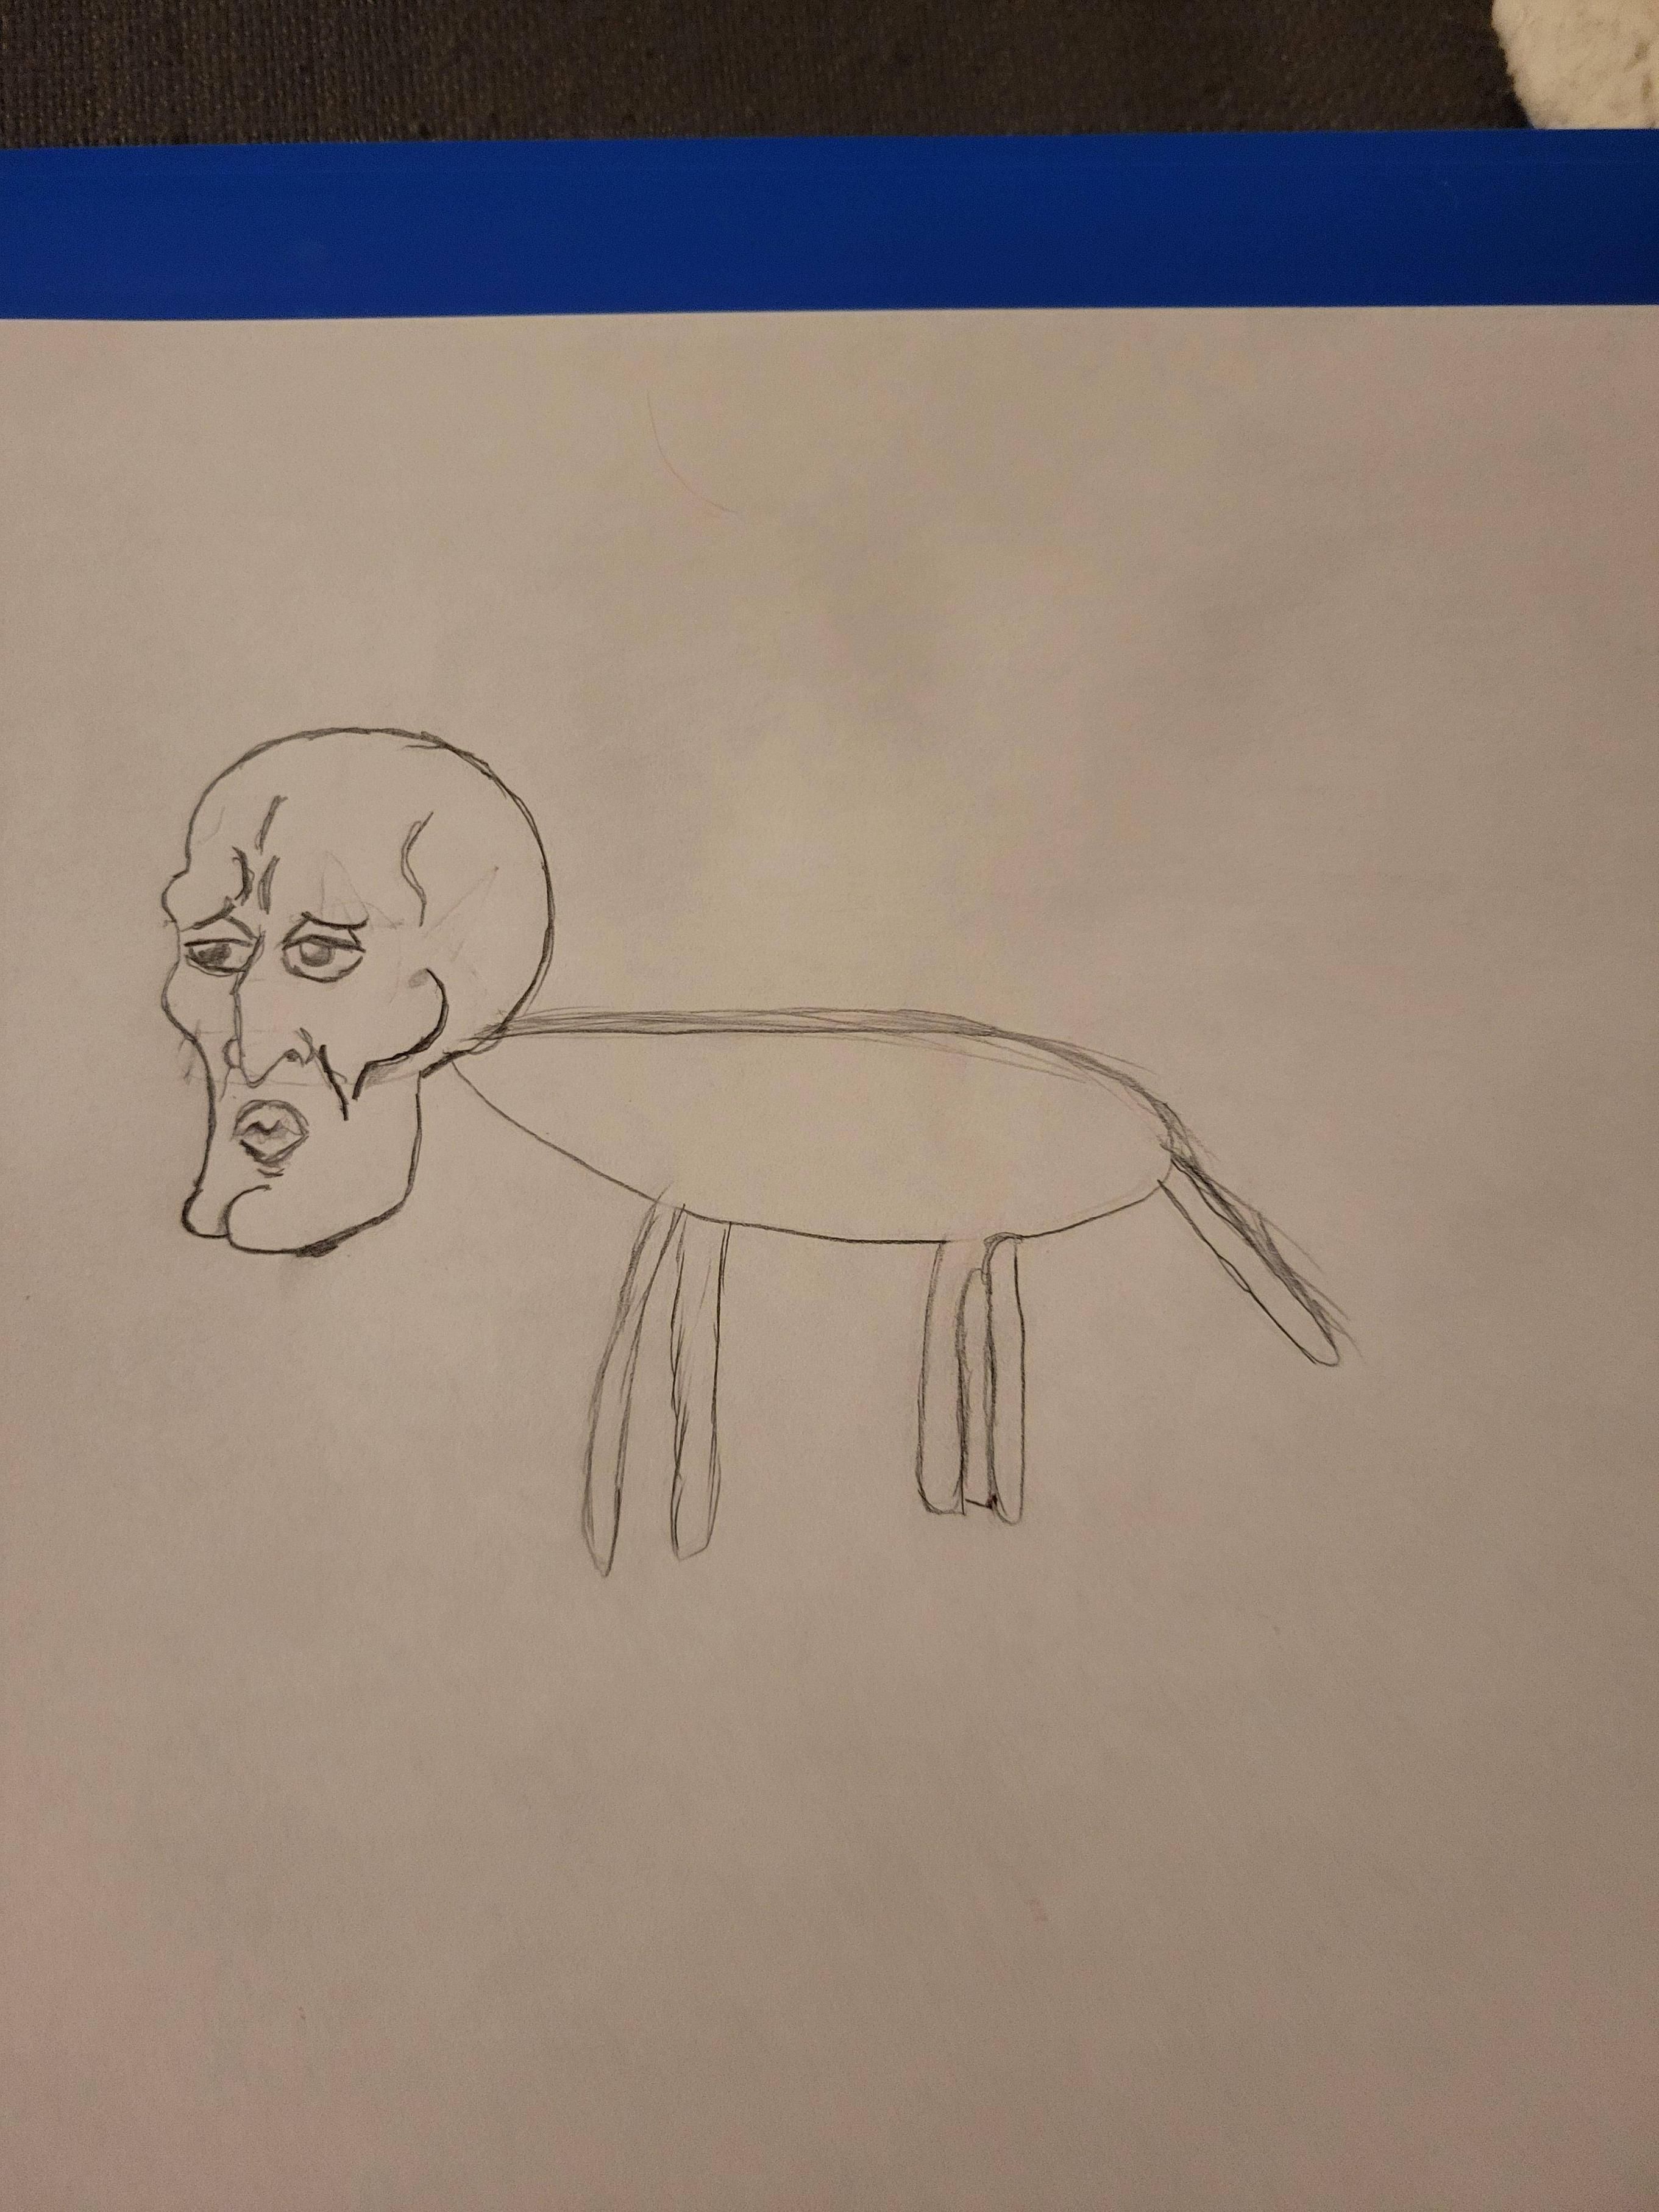 Daughter asked me to draw a head for her wolf.